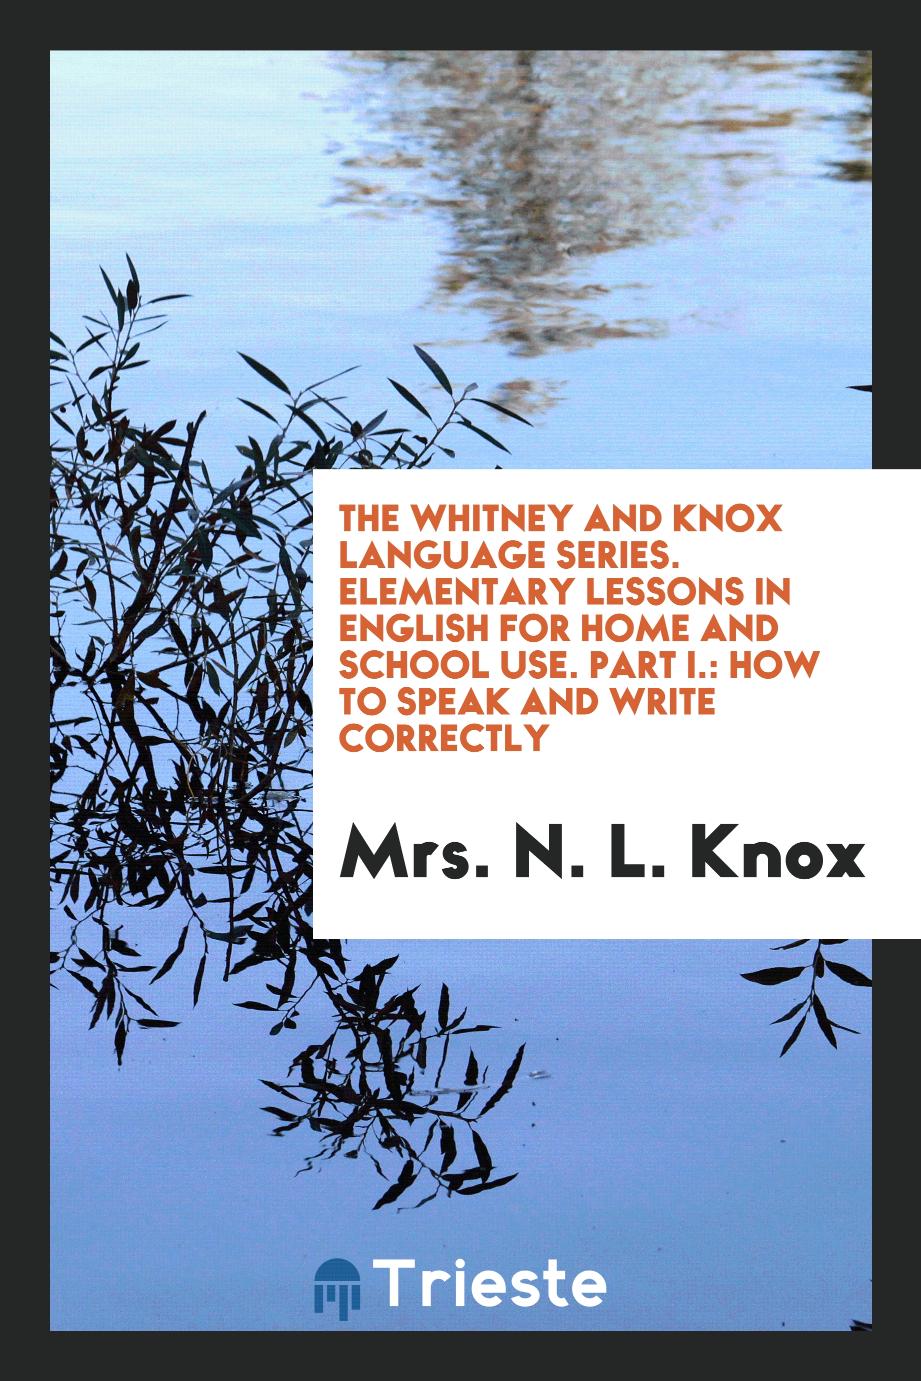 The Whitney and Knox Language Series. Elementary Lessons in English for Home and School Use. Part I.: How to Speak and Write Correctly